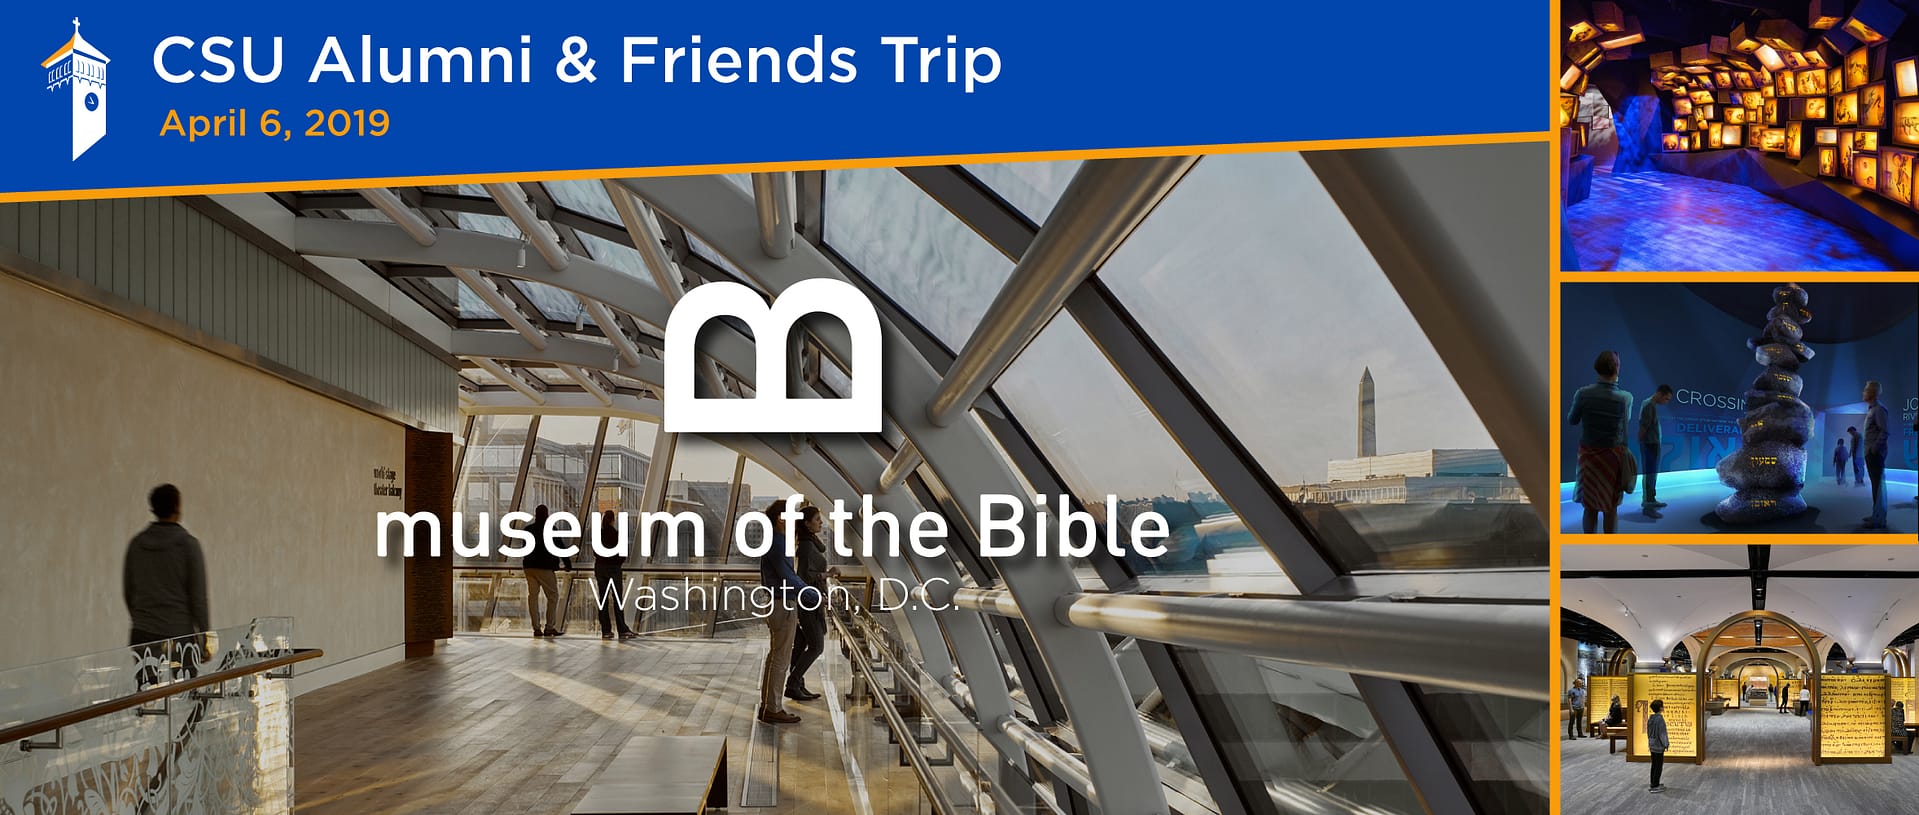 Museum of the Bible header